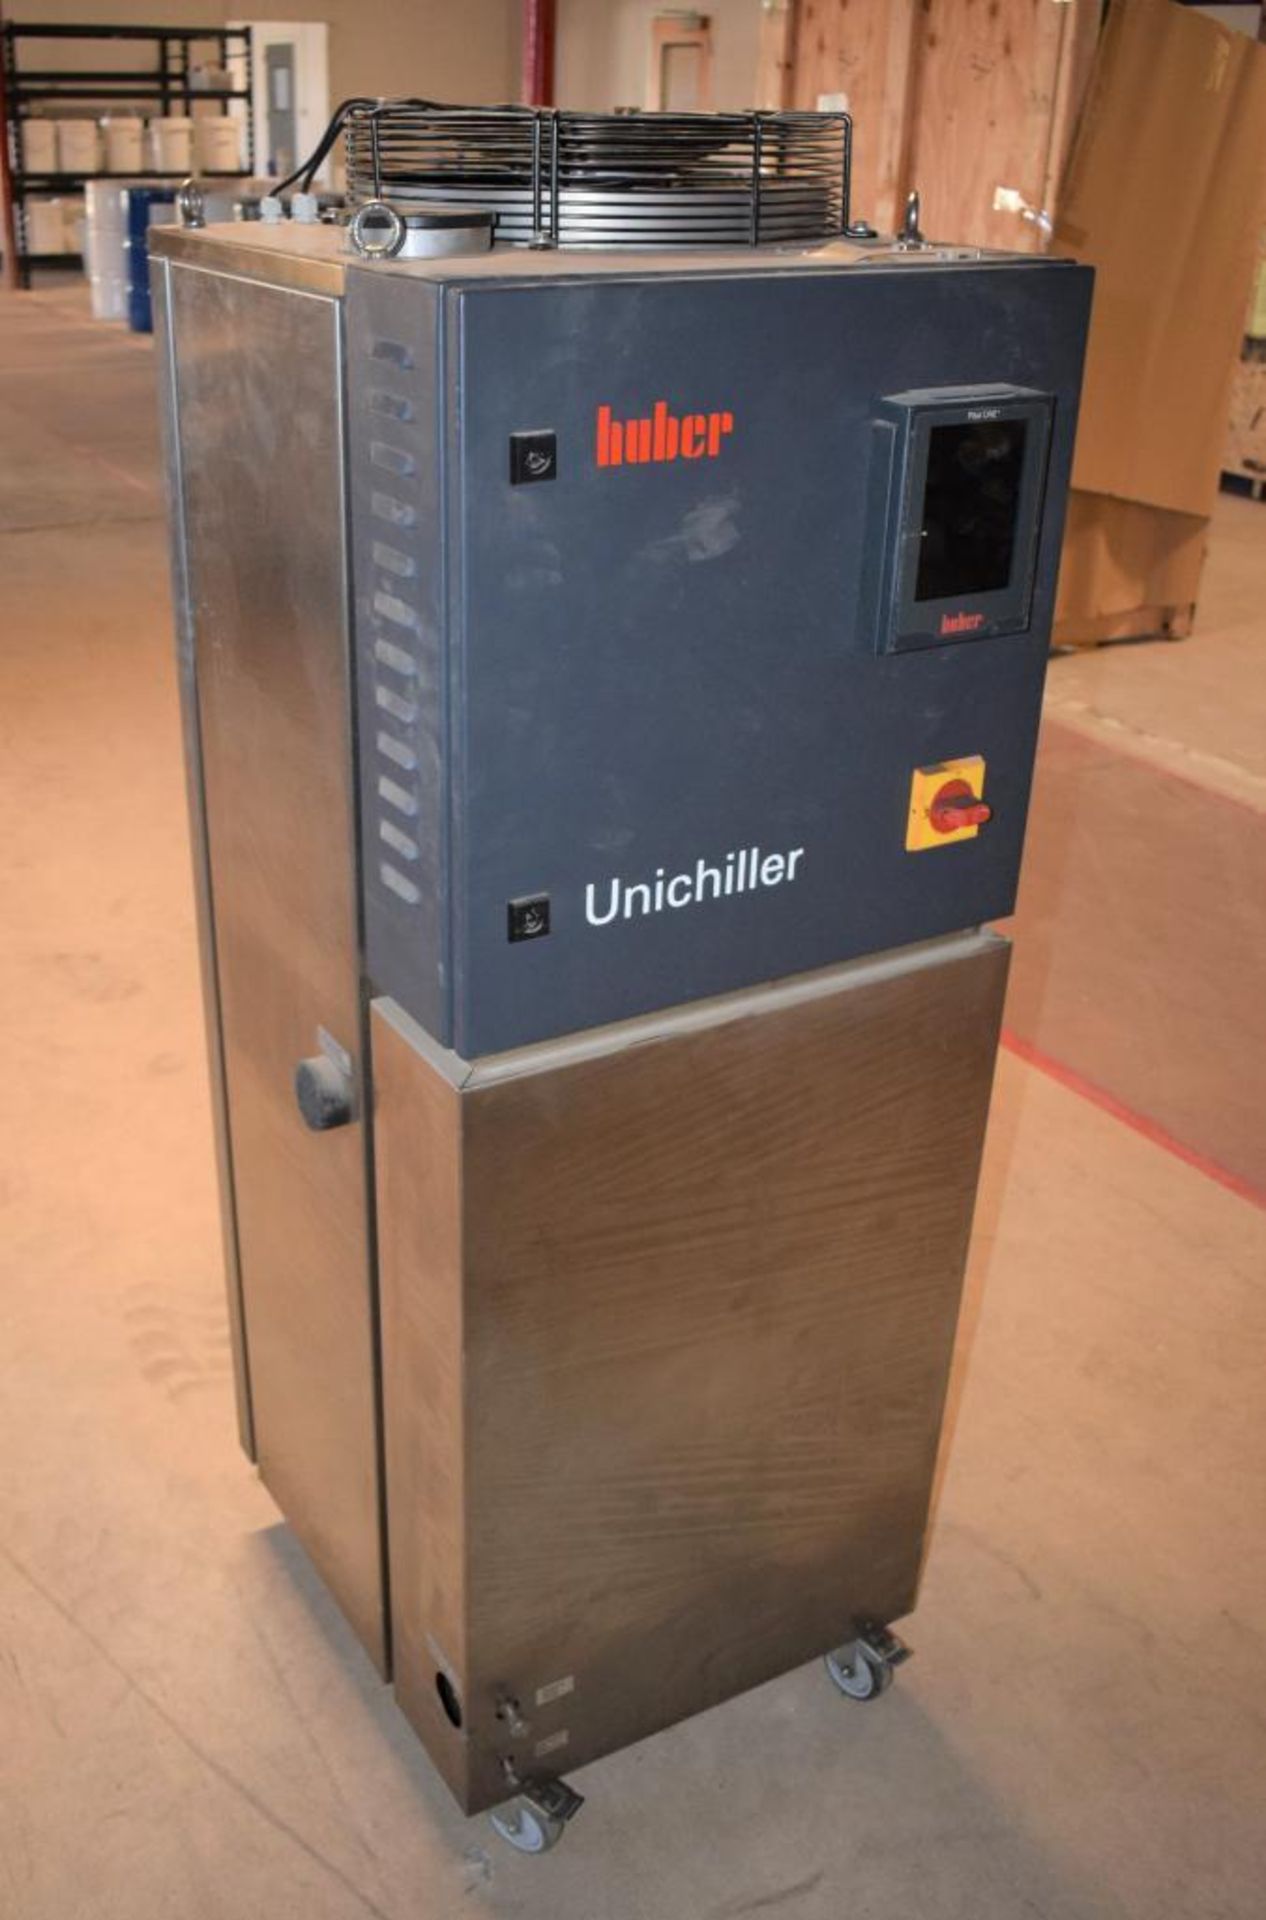 Huber Air Cooled Unichiller, Model 040T. Approximate operating temperature range -10 to +40 degrees